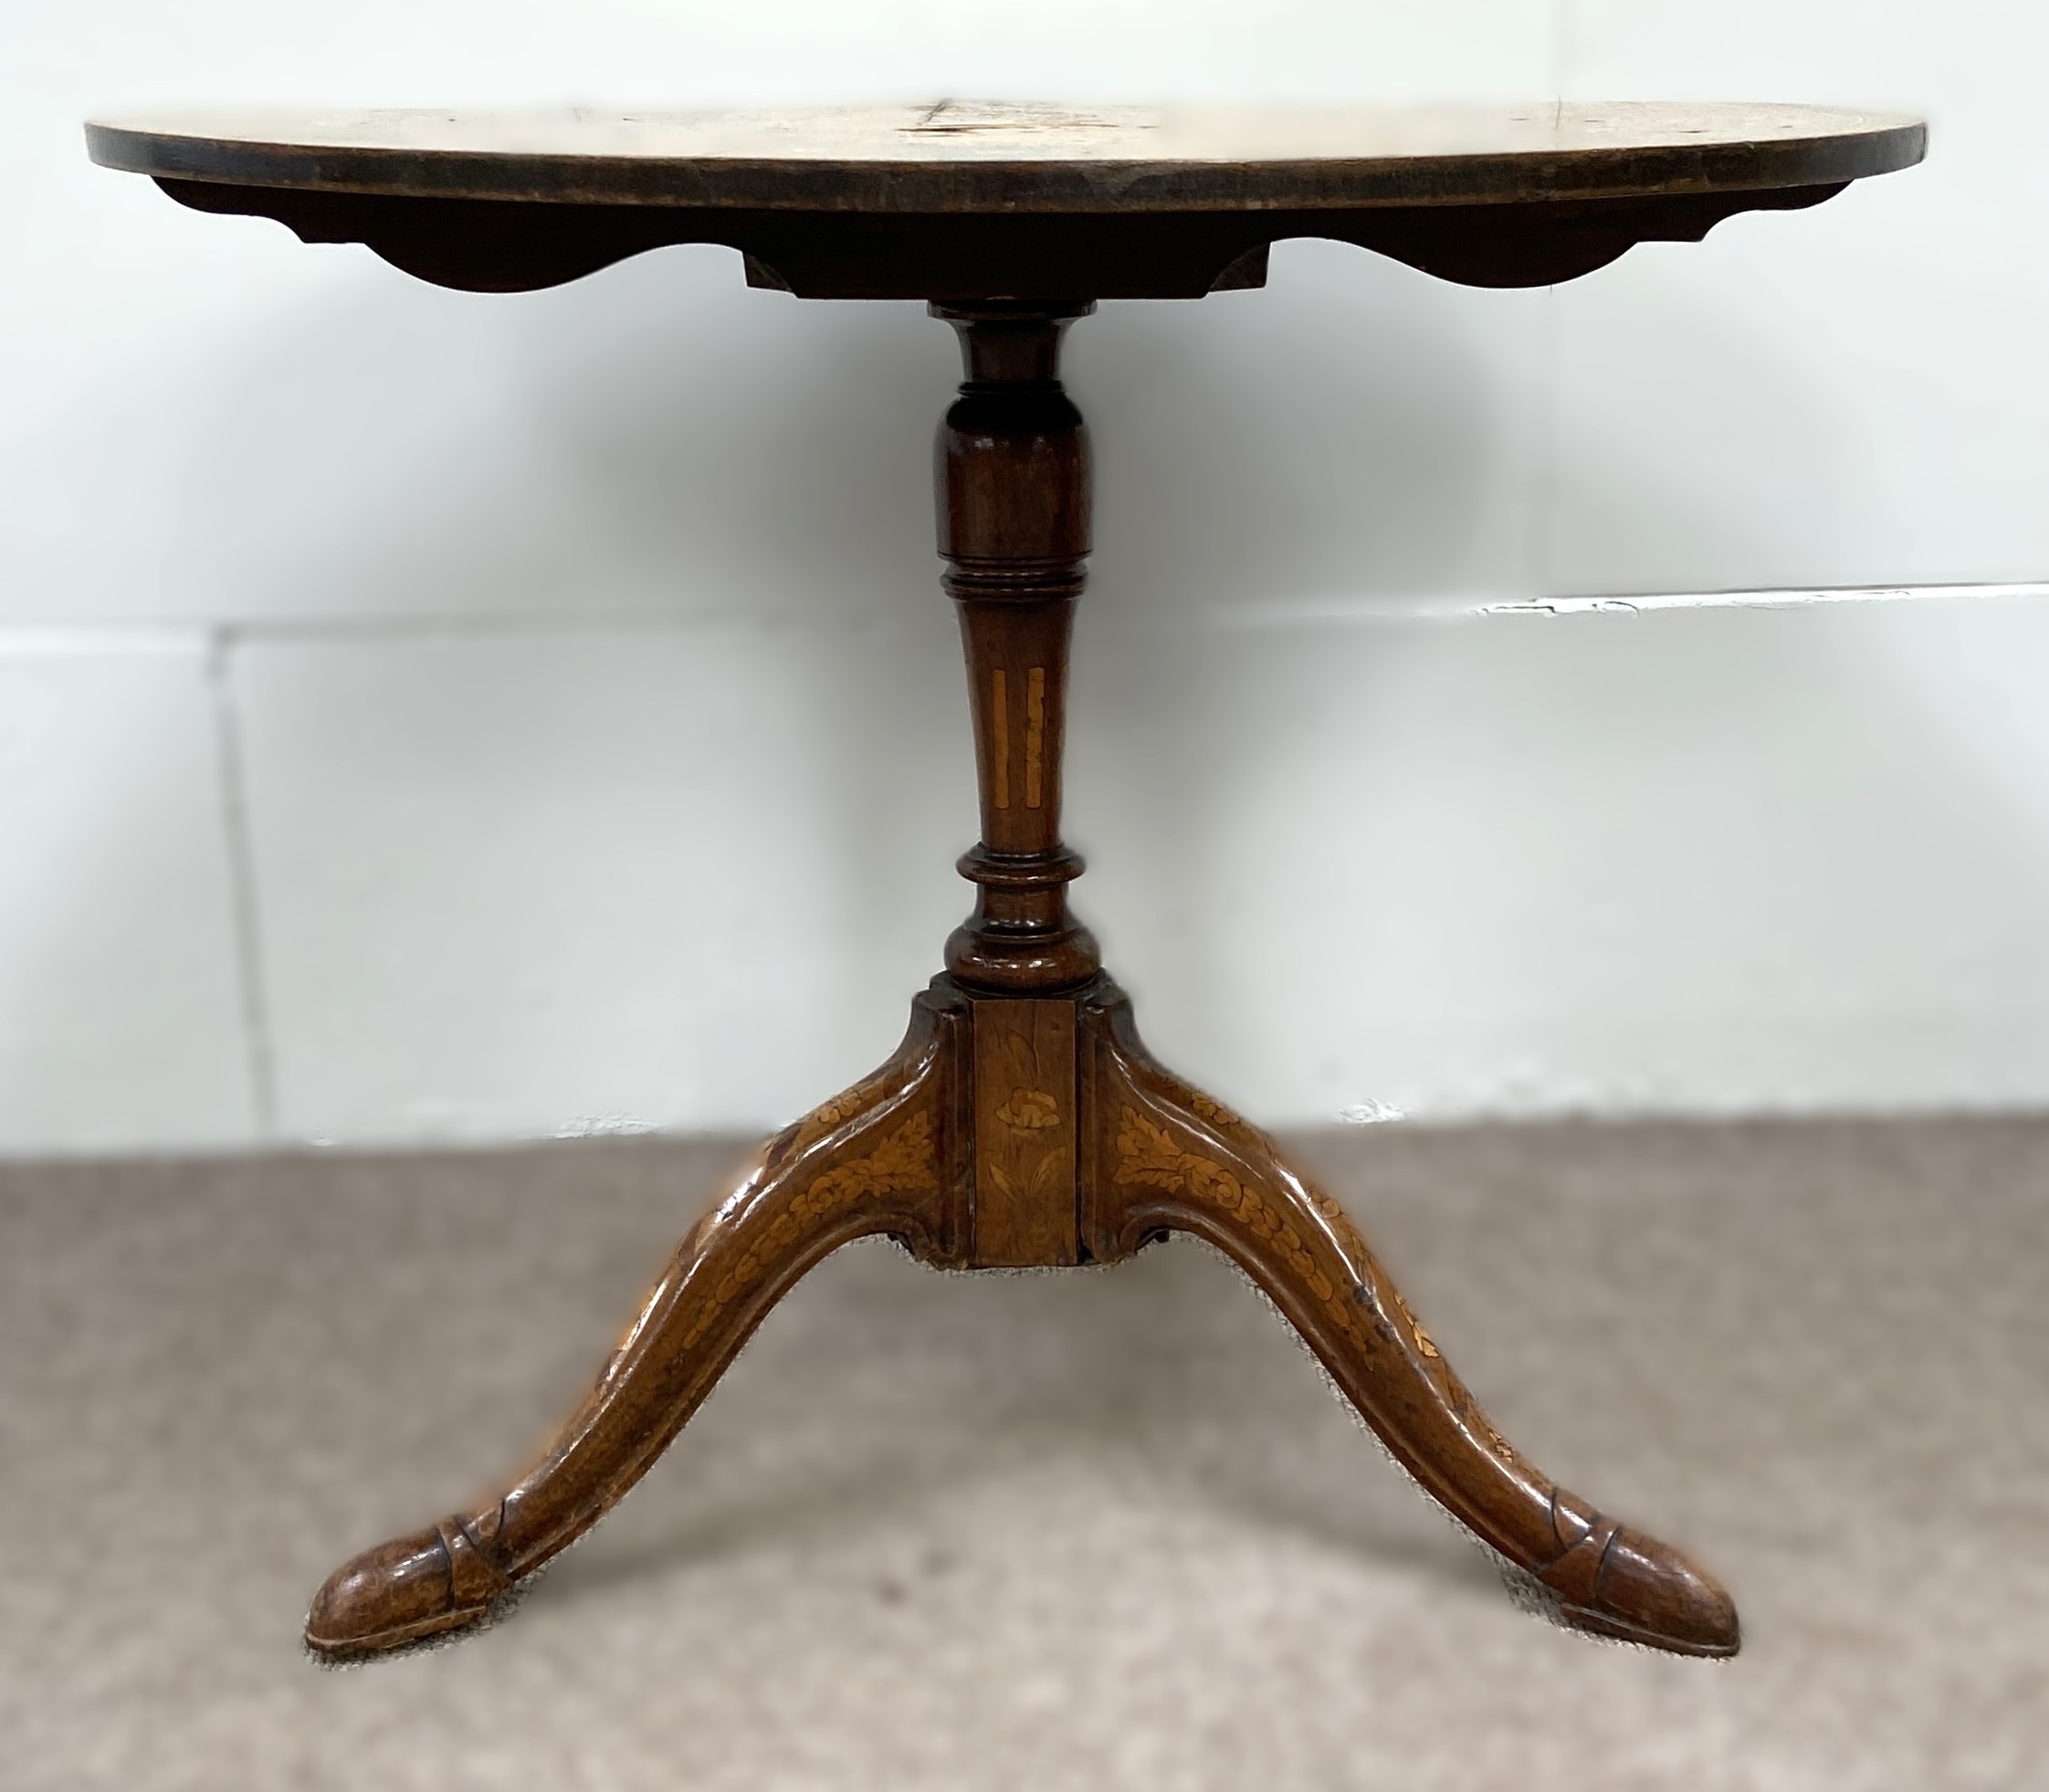 An Anglo-Dutch inlaid circular wine table, late 18th century and later, with a tilting coromandel - Image 2 of 6